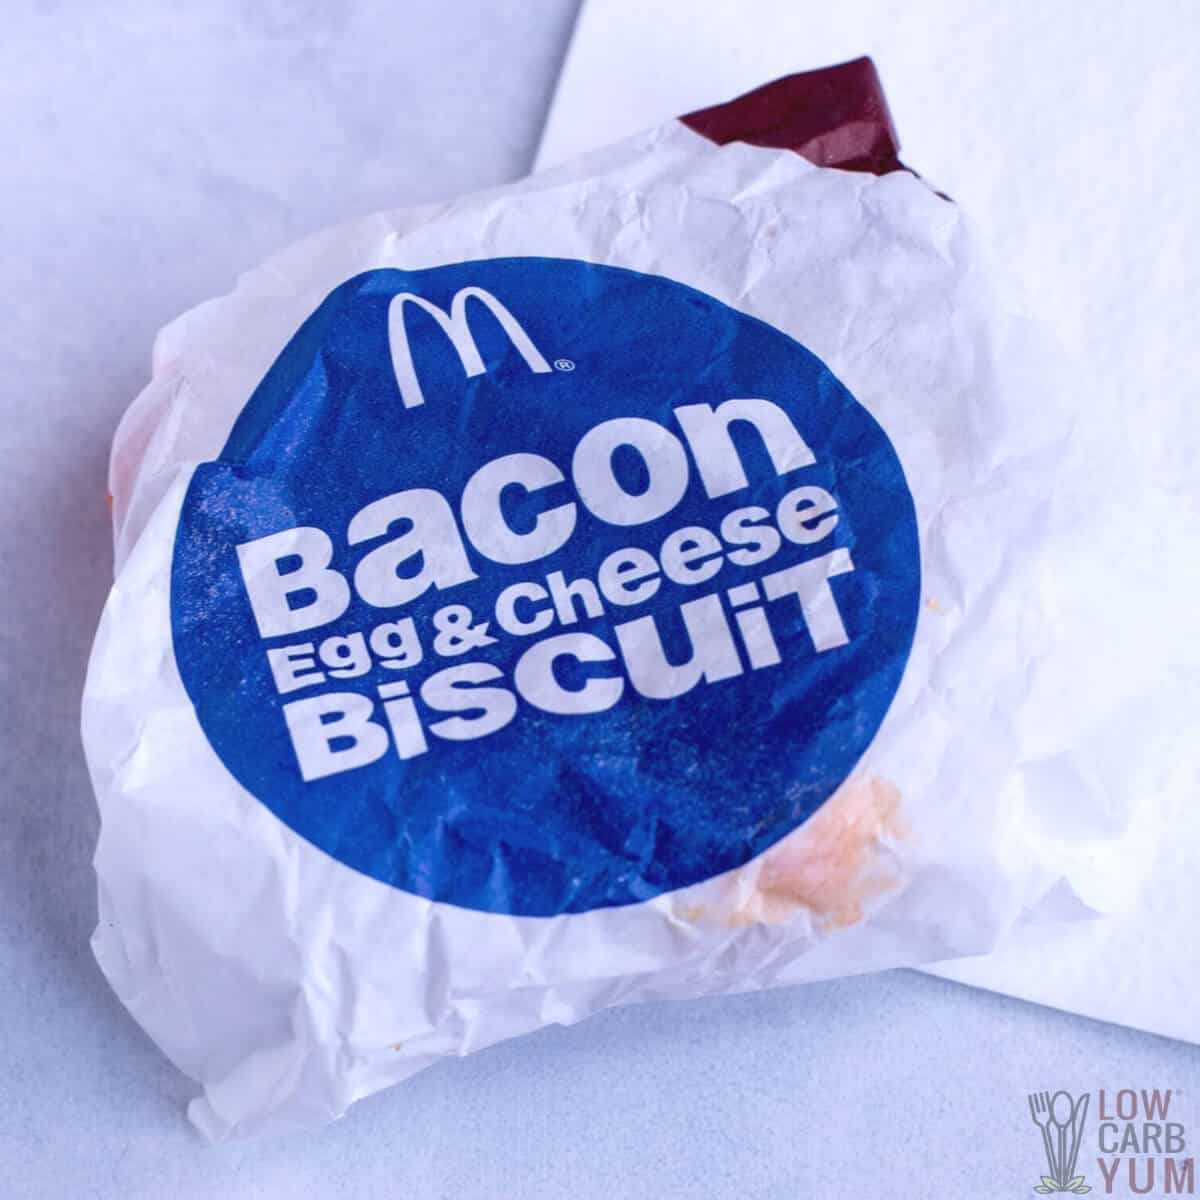 mcdonalds bacon egg cheese biscuit keto